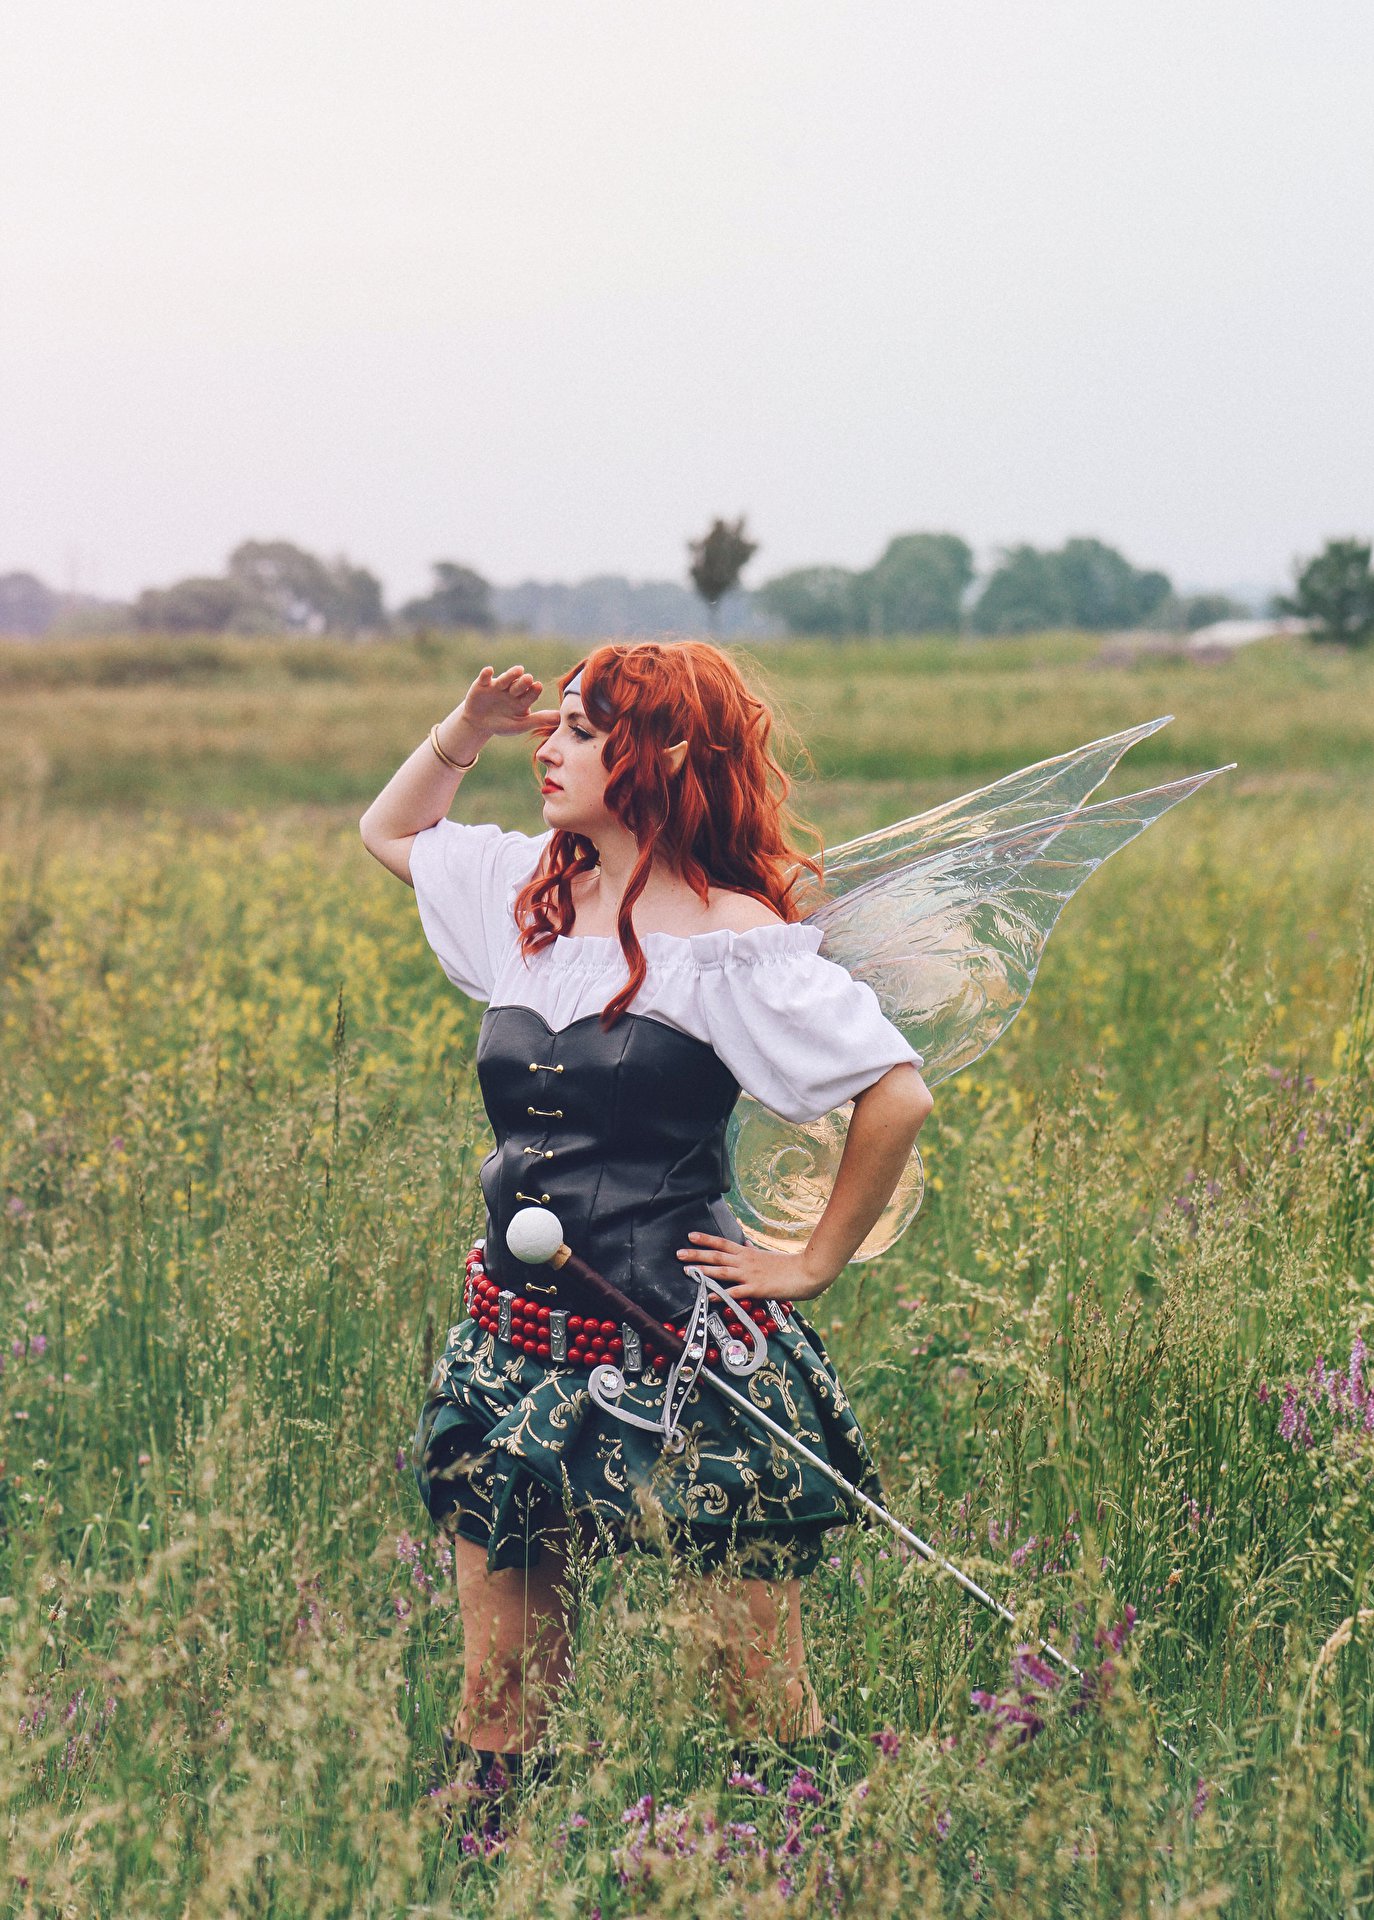 Cospix.net photo featuring Visual Cosplay